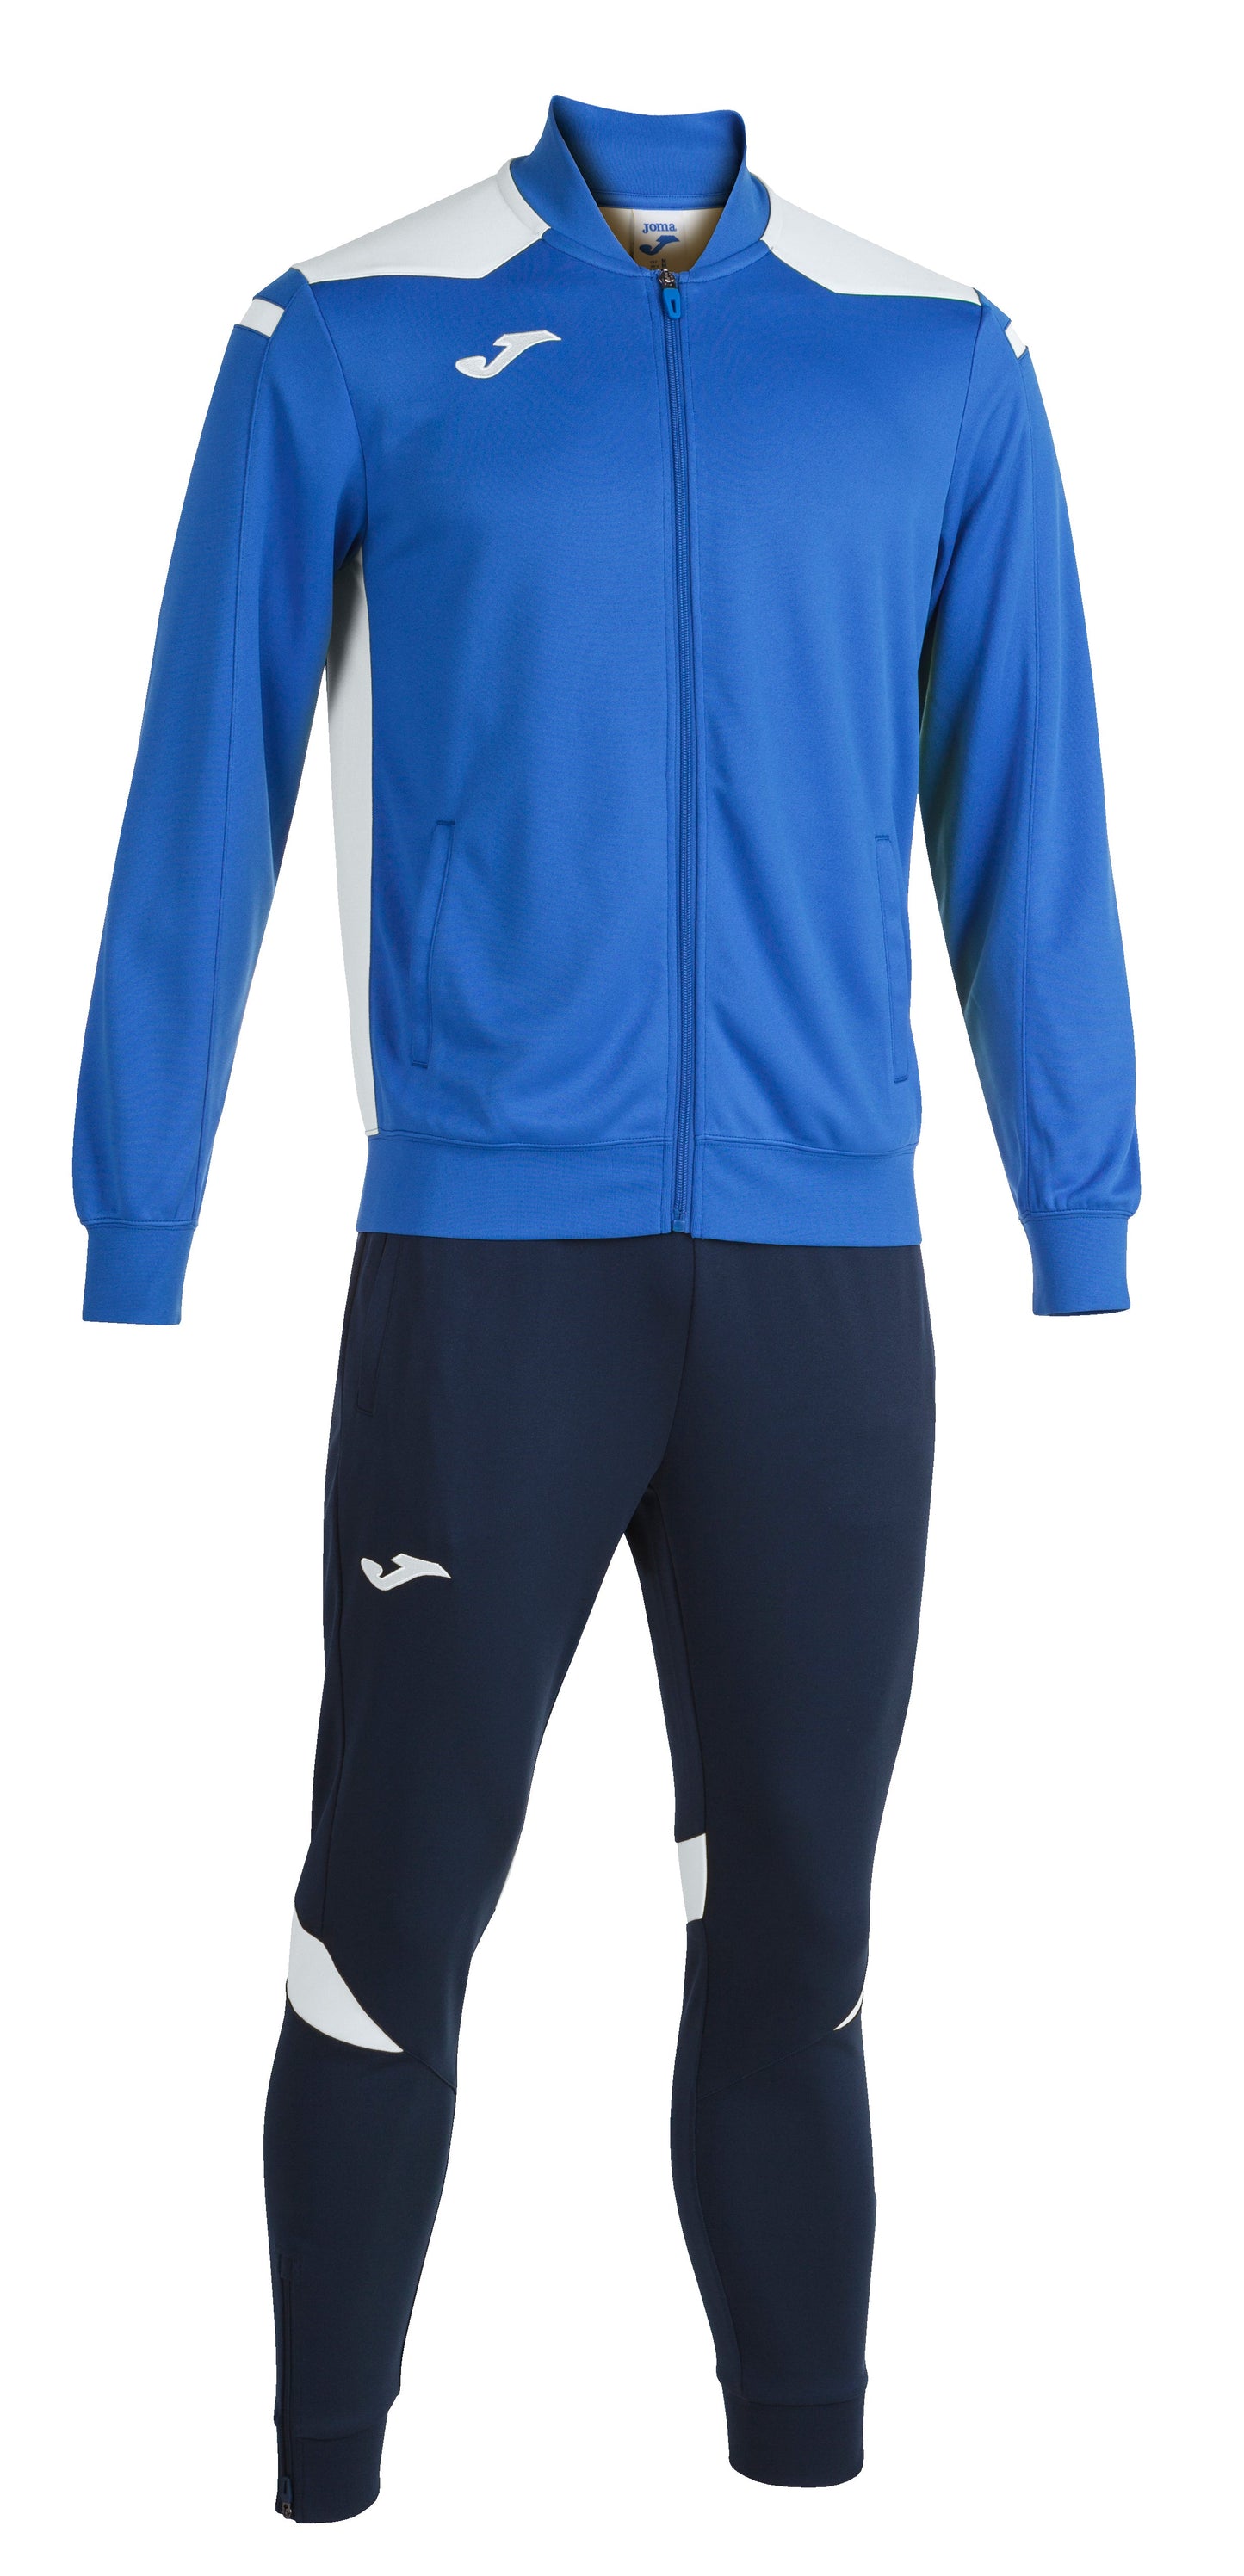 Joma Sport Tracksuit available in Joma Canada Store. Customize your teamwear with sponsors and numbers. Joma is shipping in Canada.